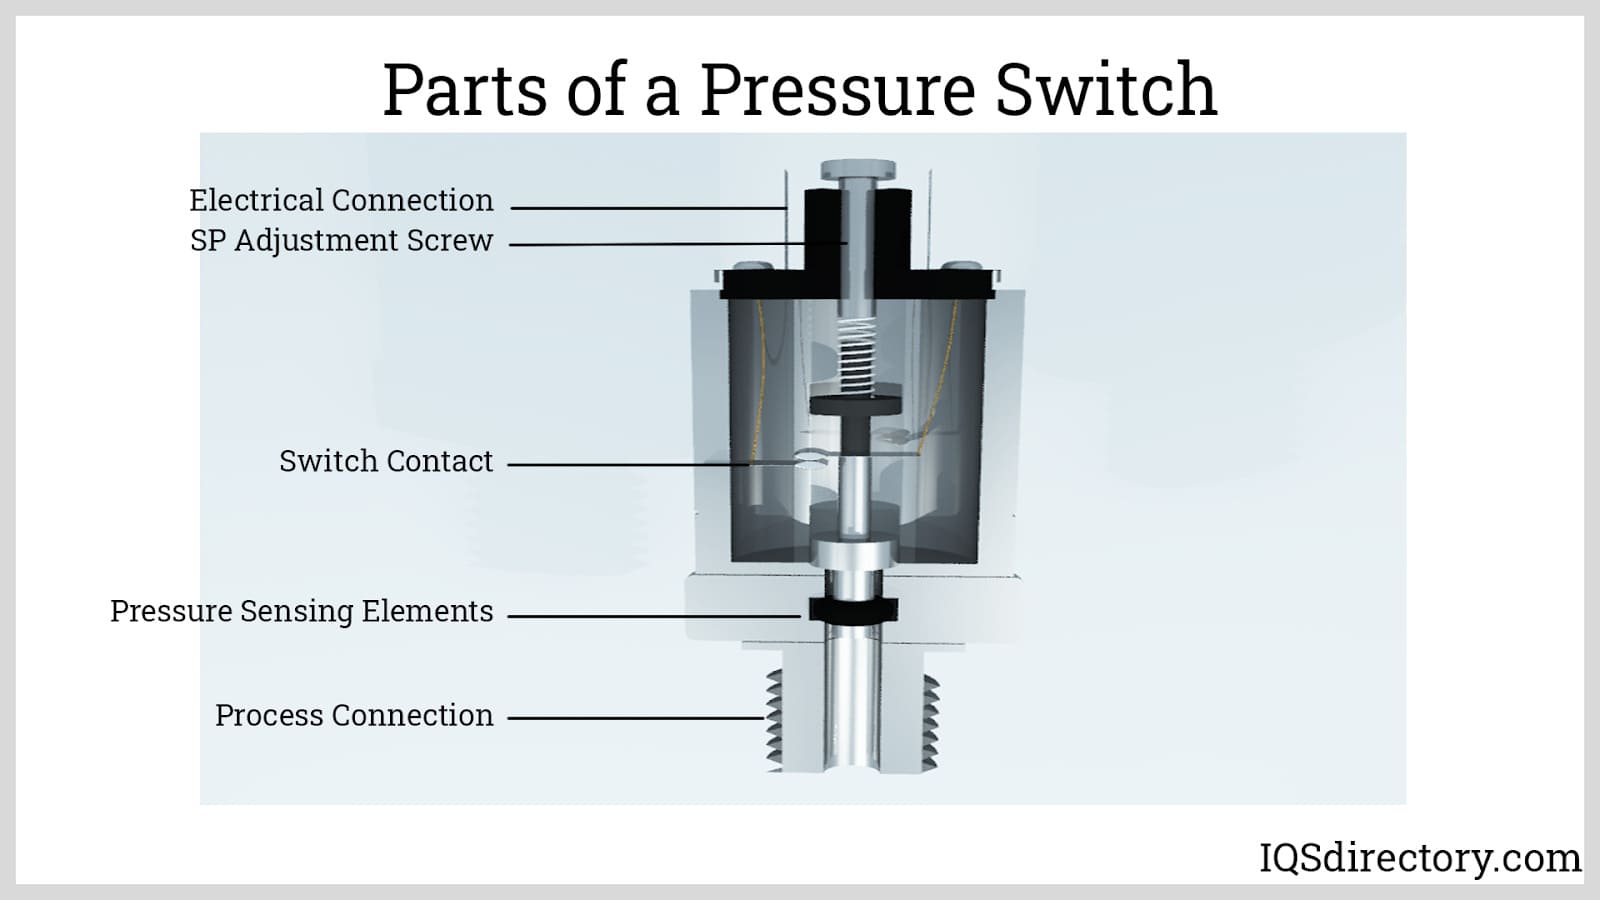 Parts of a Pressure Switch